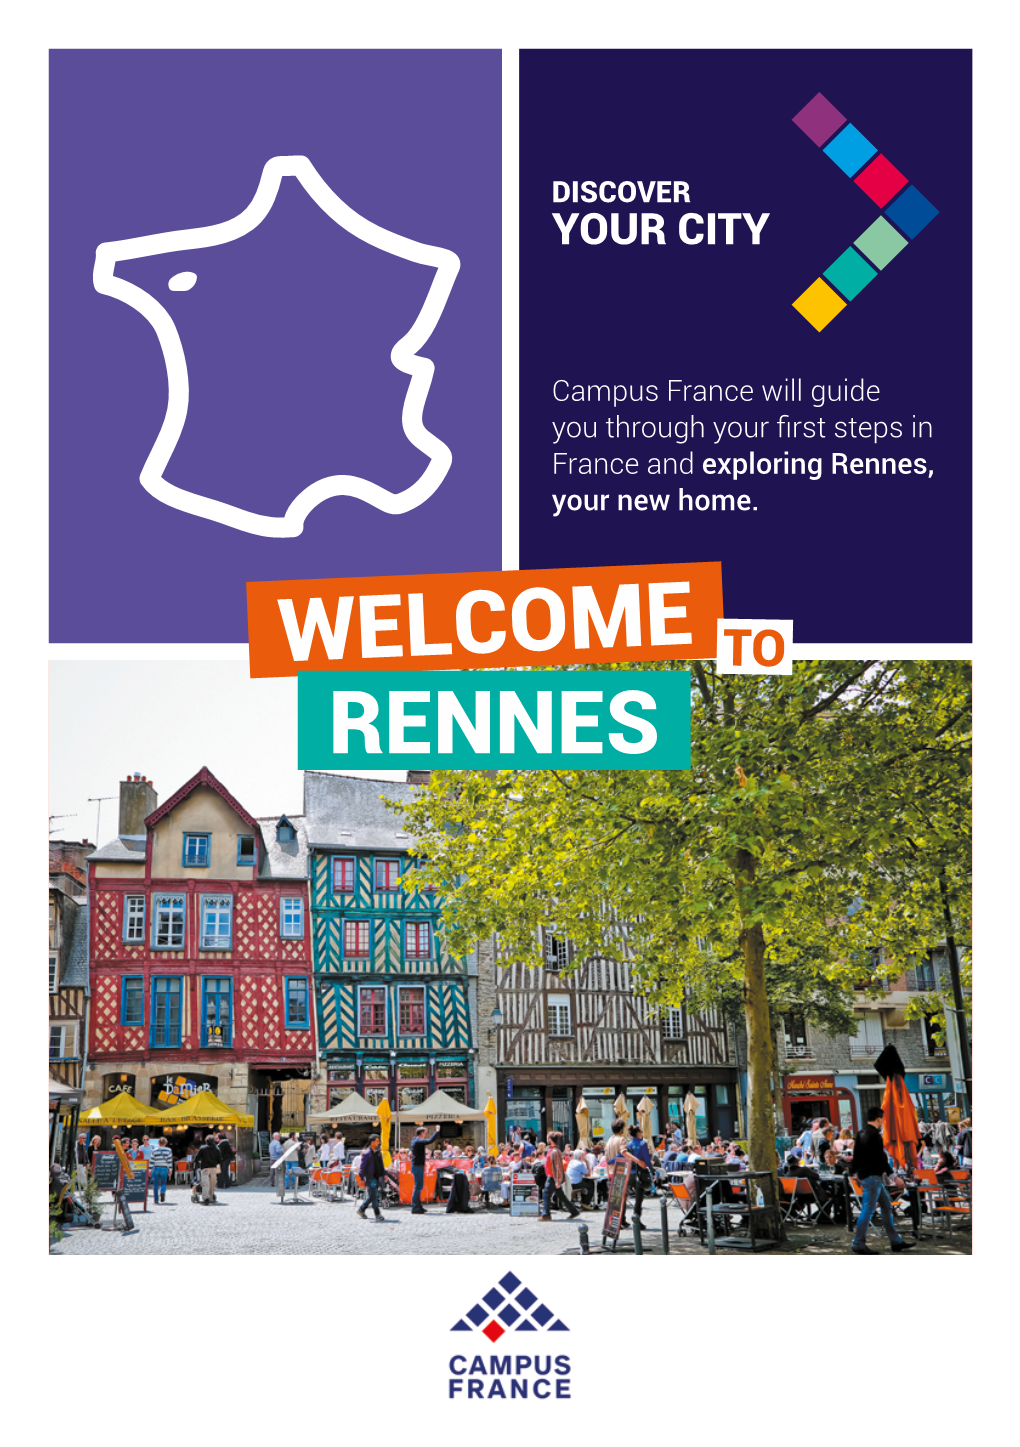 Rennes, Your New Home